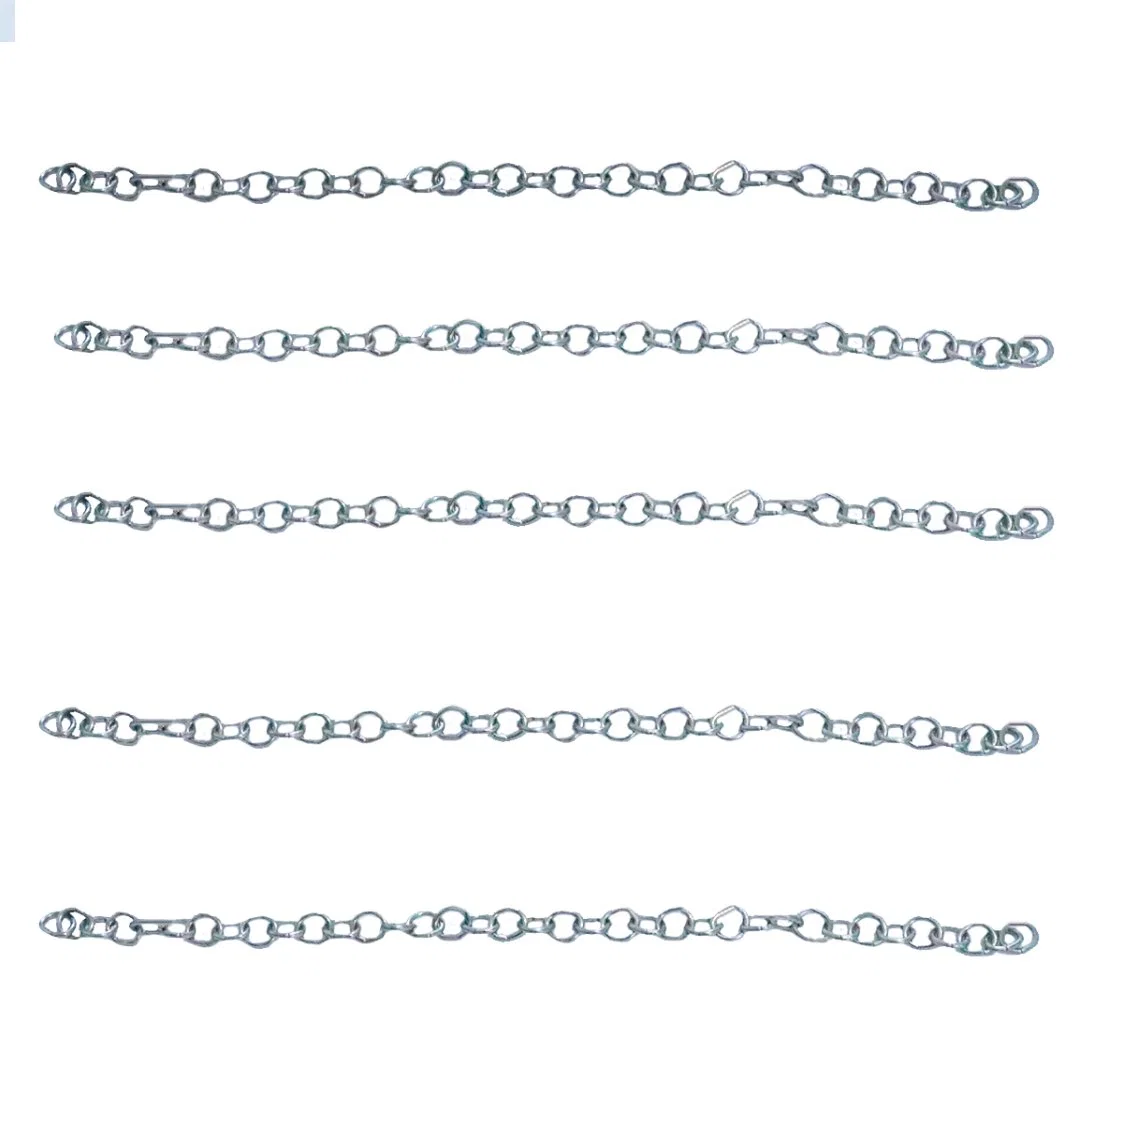 Stainless Steel Chain Galvanized Welded Steel Long Link Metal Chain